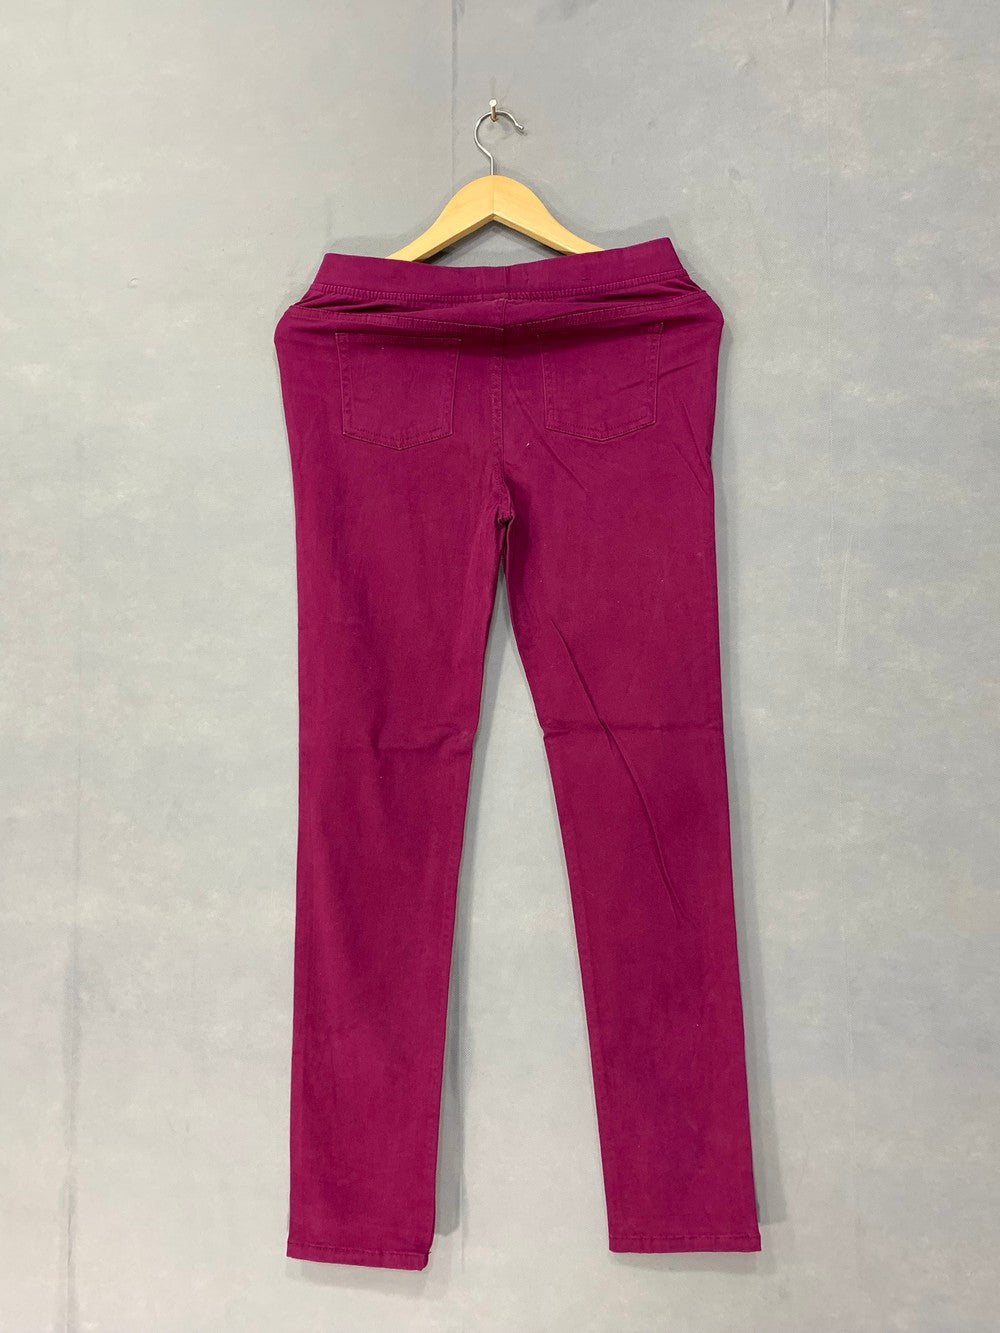 George Branded Original Cotton For Women Pant